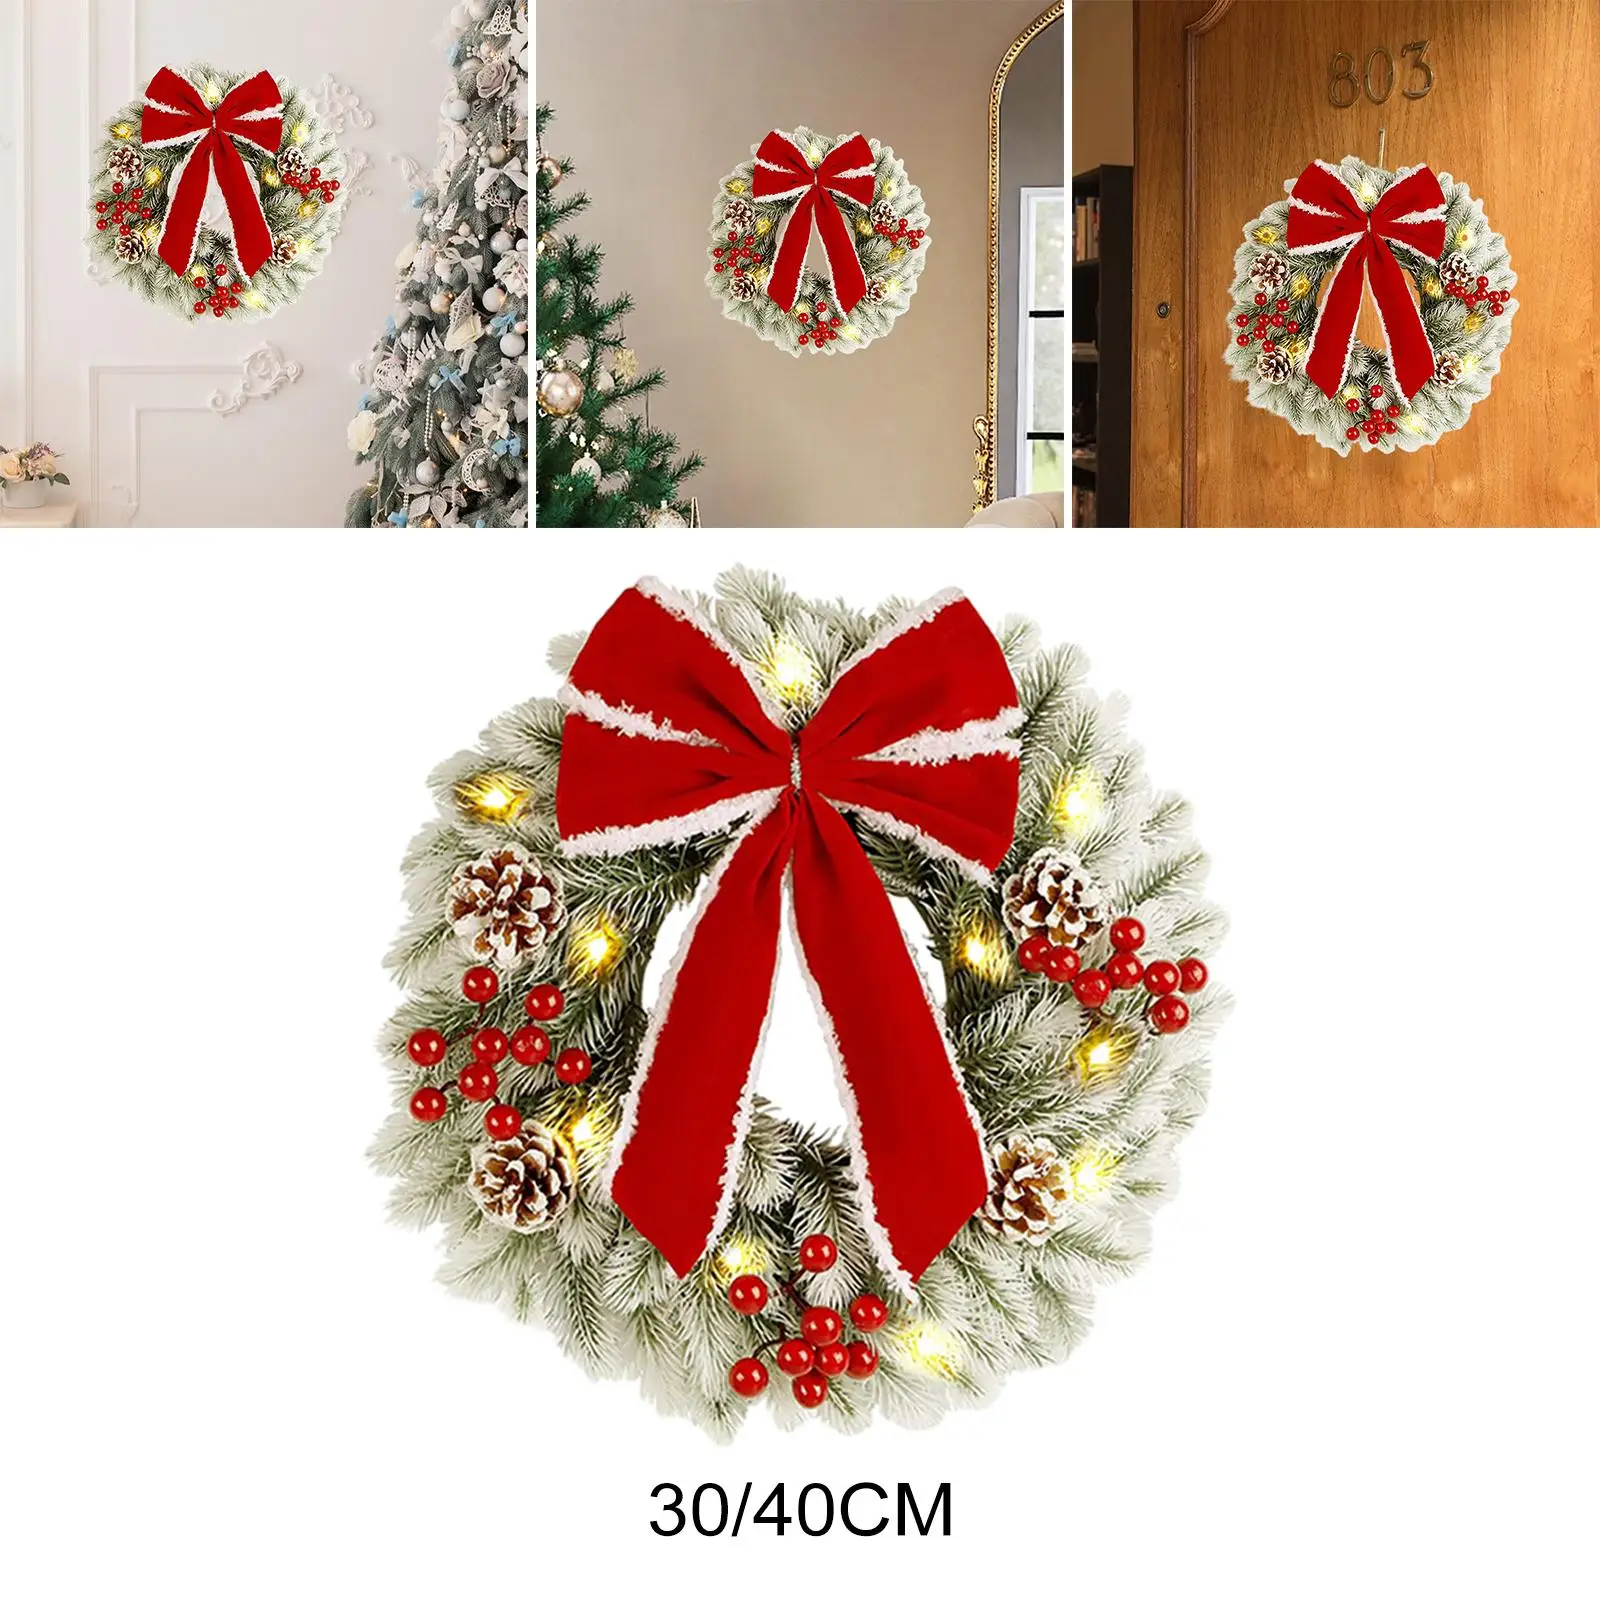 Christmas Wreath with Light Party Festival Door Ornaments Xmas Wreath Holiday Garland for Home Indoor Outdoor Wall Party Decor